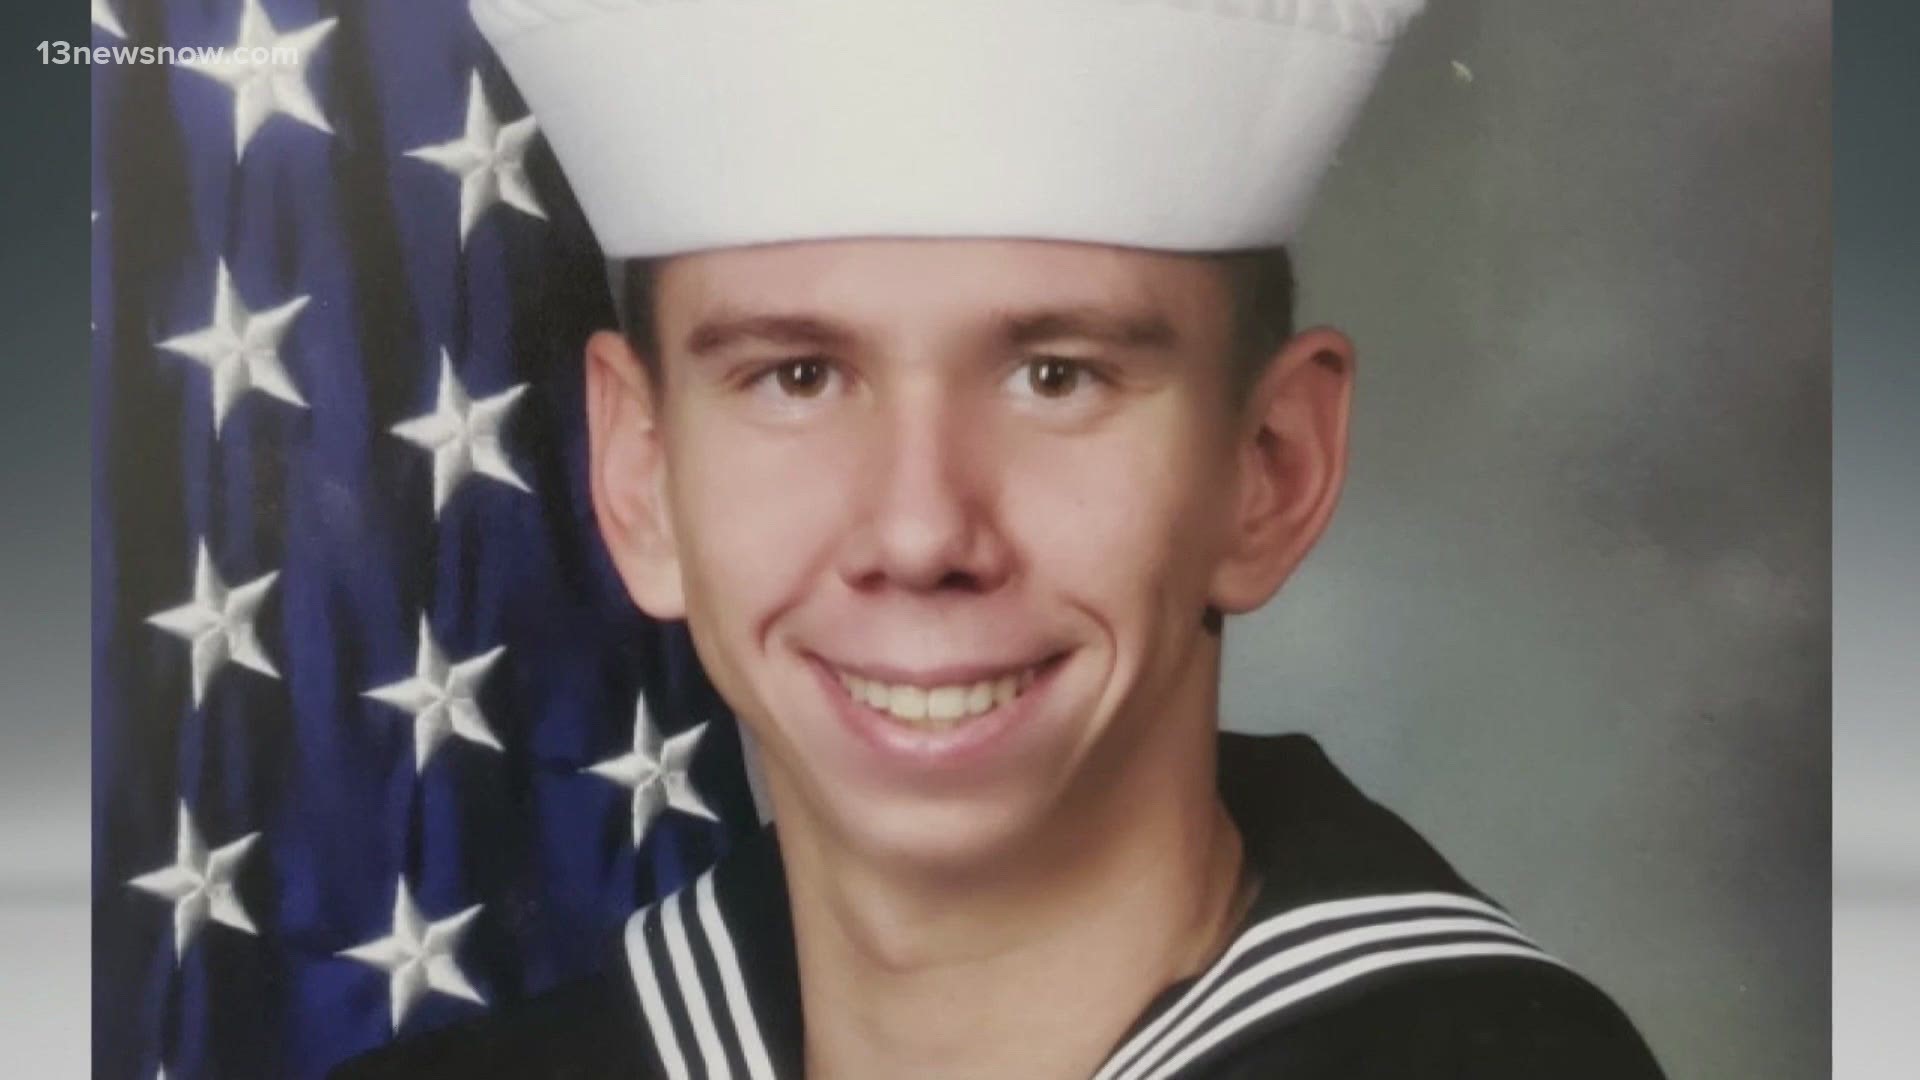 Two years after their sailor son's death at his own hand, there is new hope for the young man's parents.